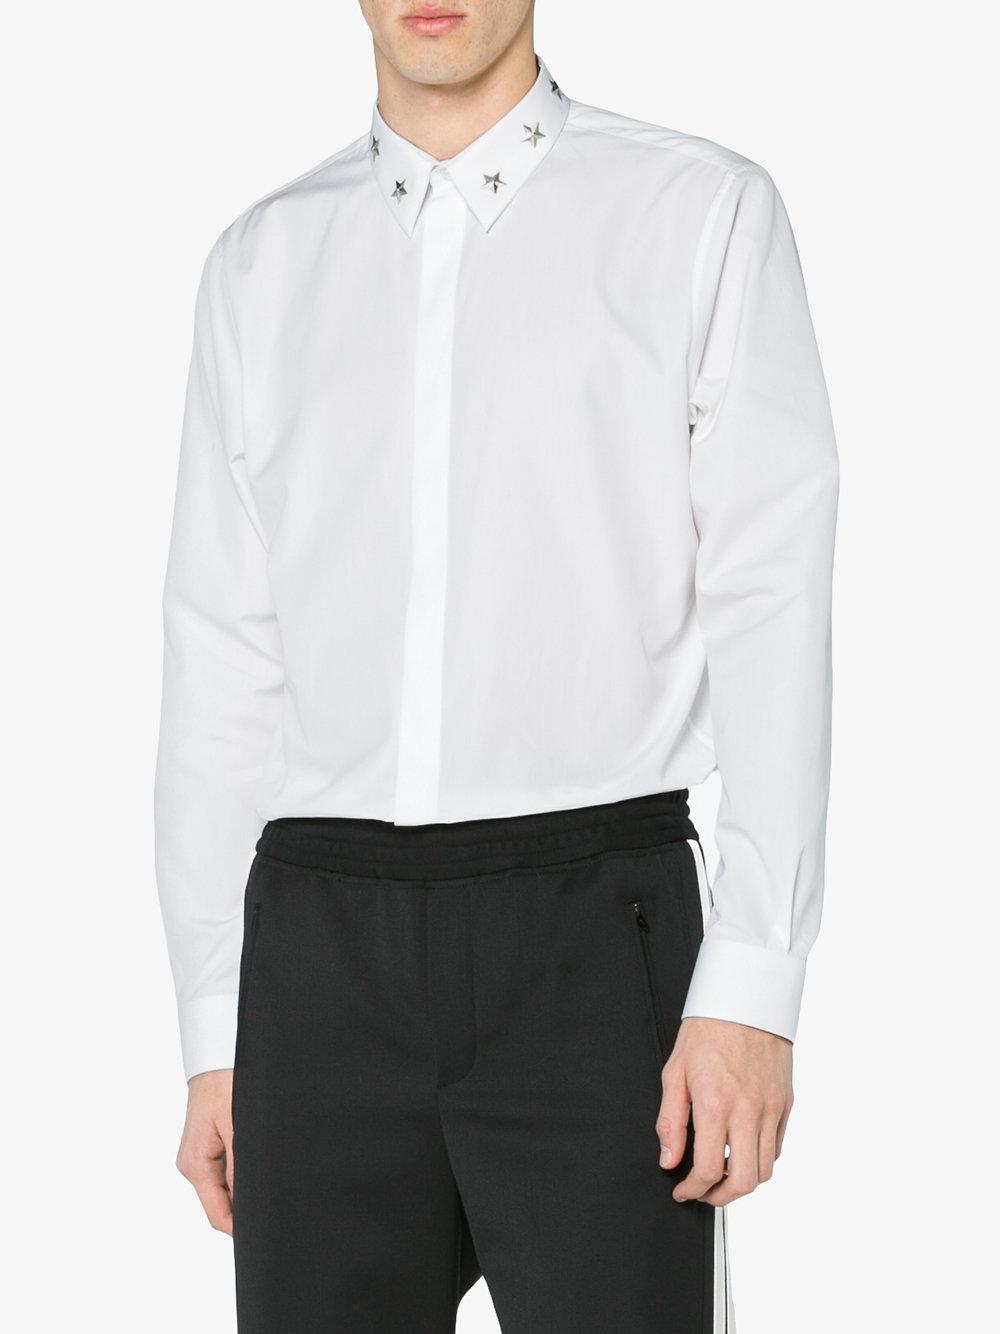 Givenchy Cotton Star Studded Collar Shirt in White for Men - Lyst